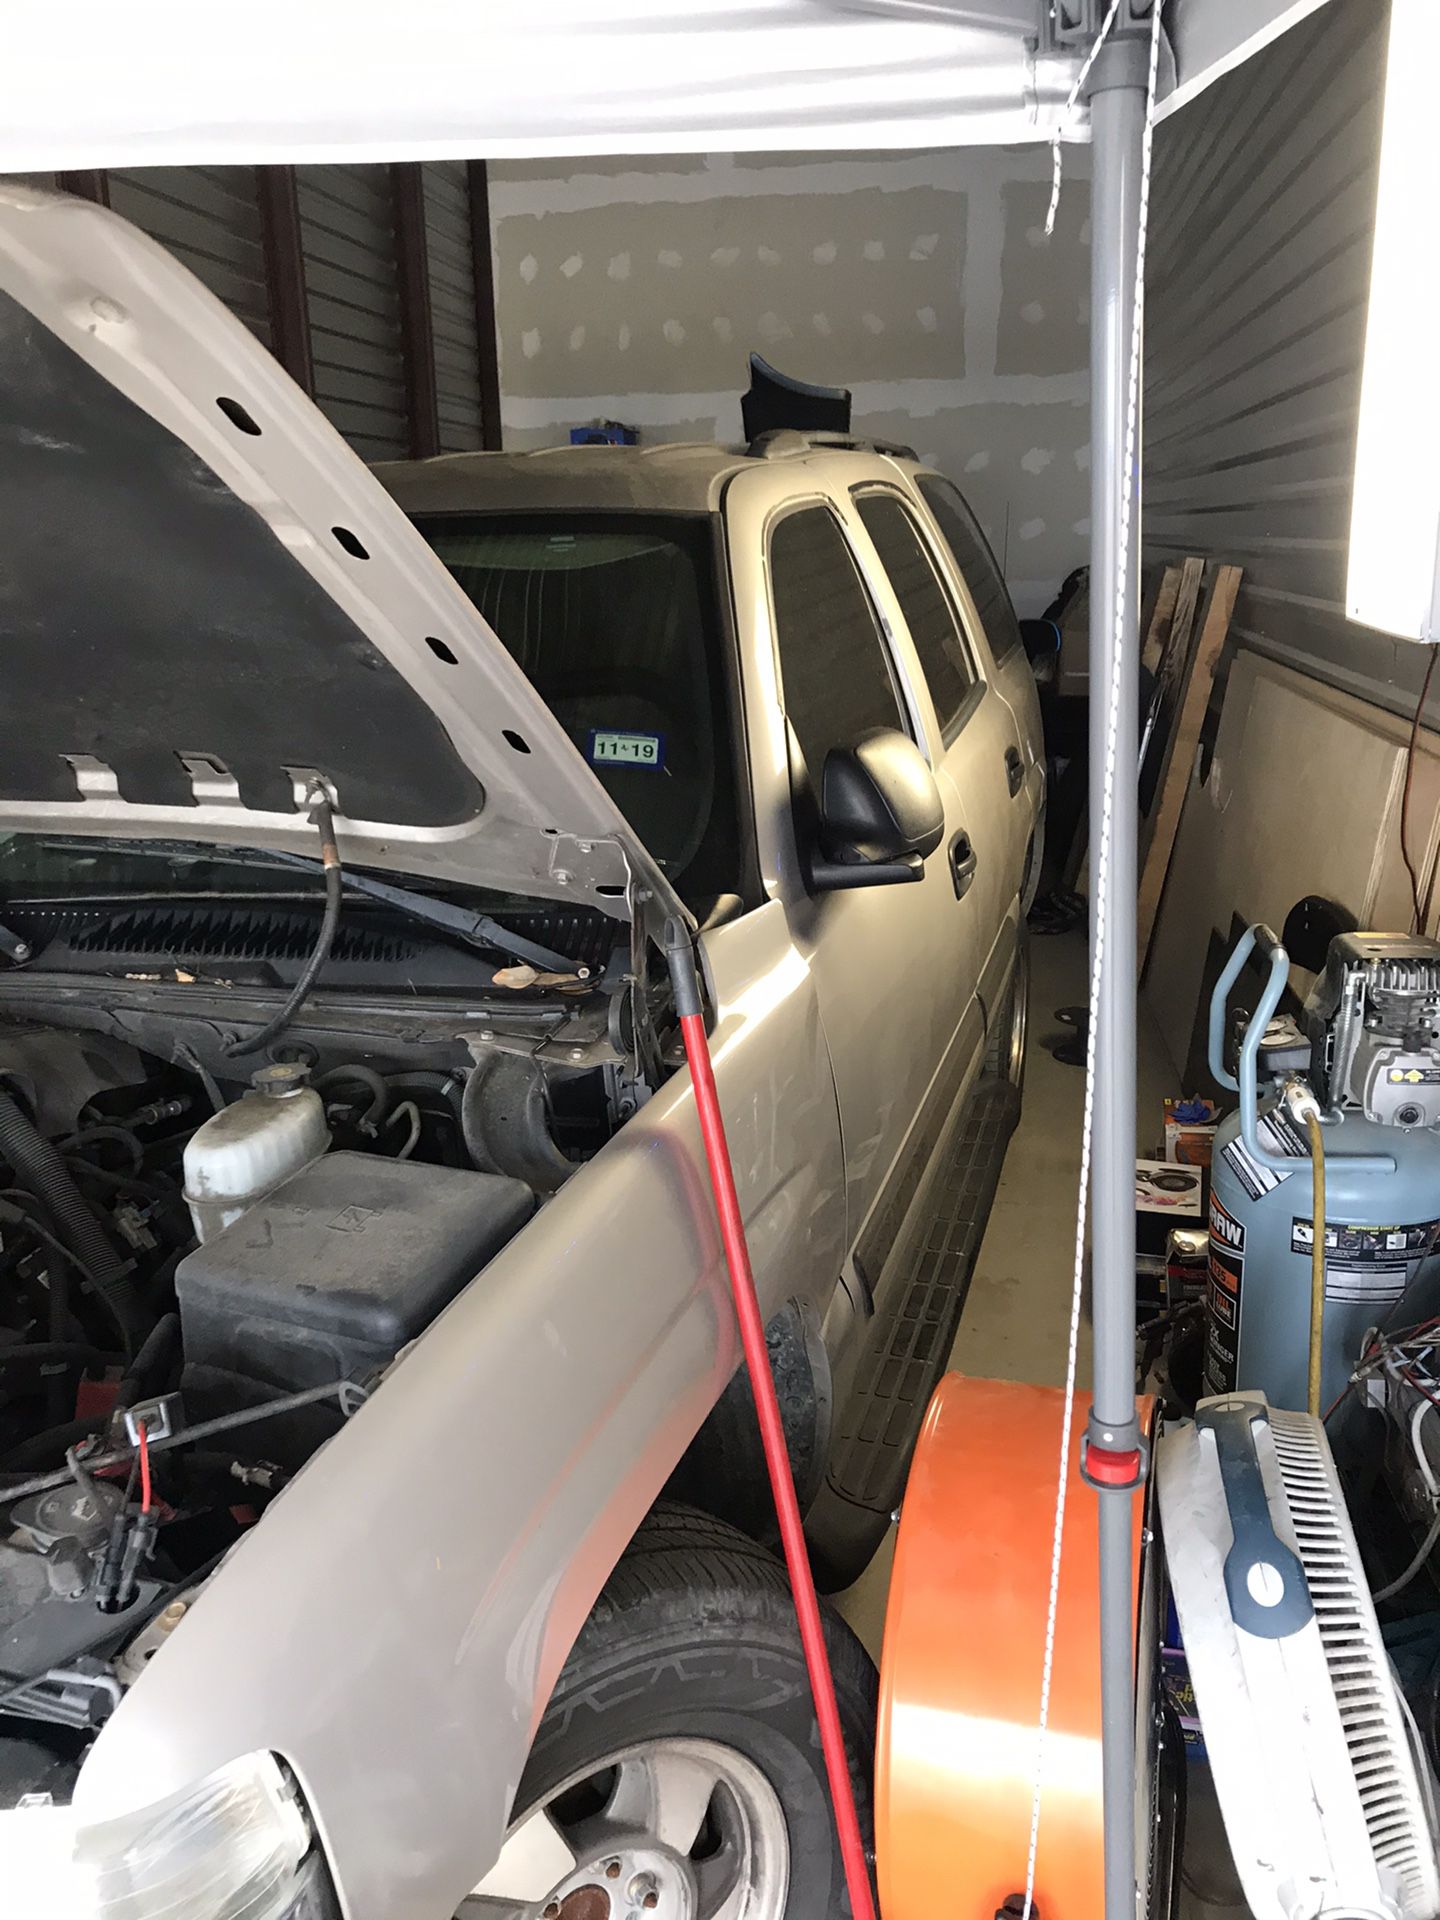 2004 Chevy Tahoe parting out